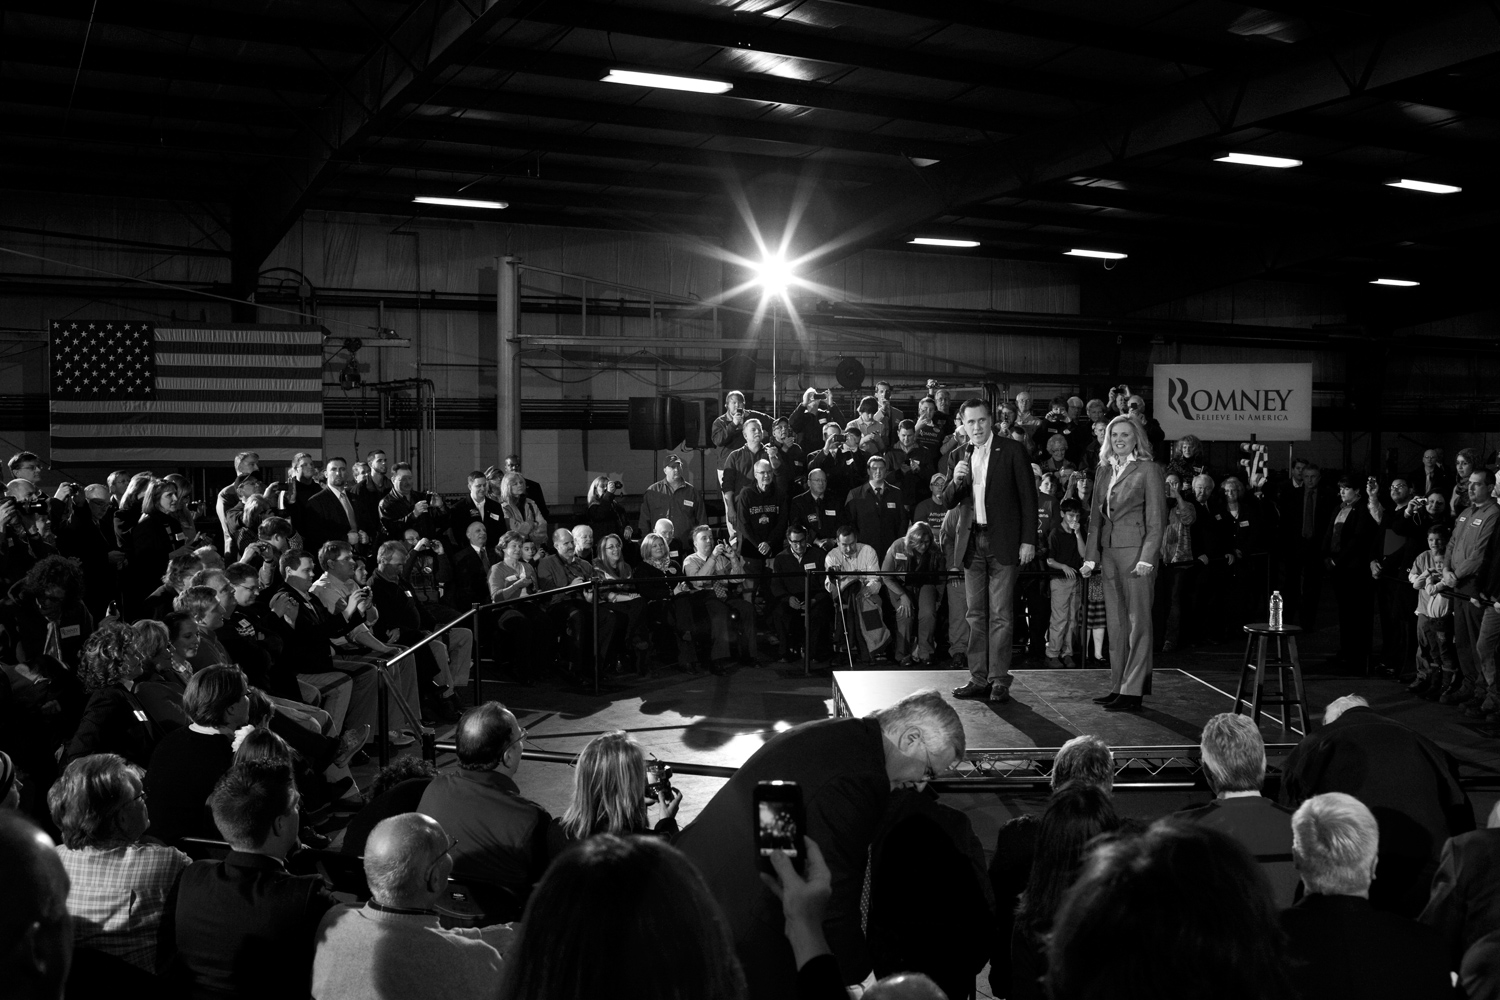 March 5, 2012. Mitt Romney speaks at Gregory Industries in Canton, Ohio.